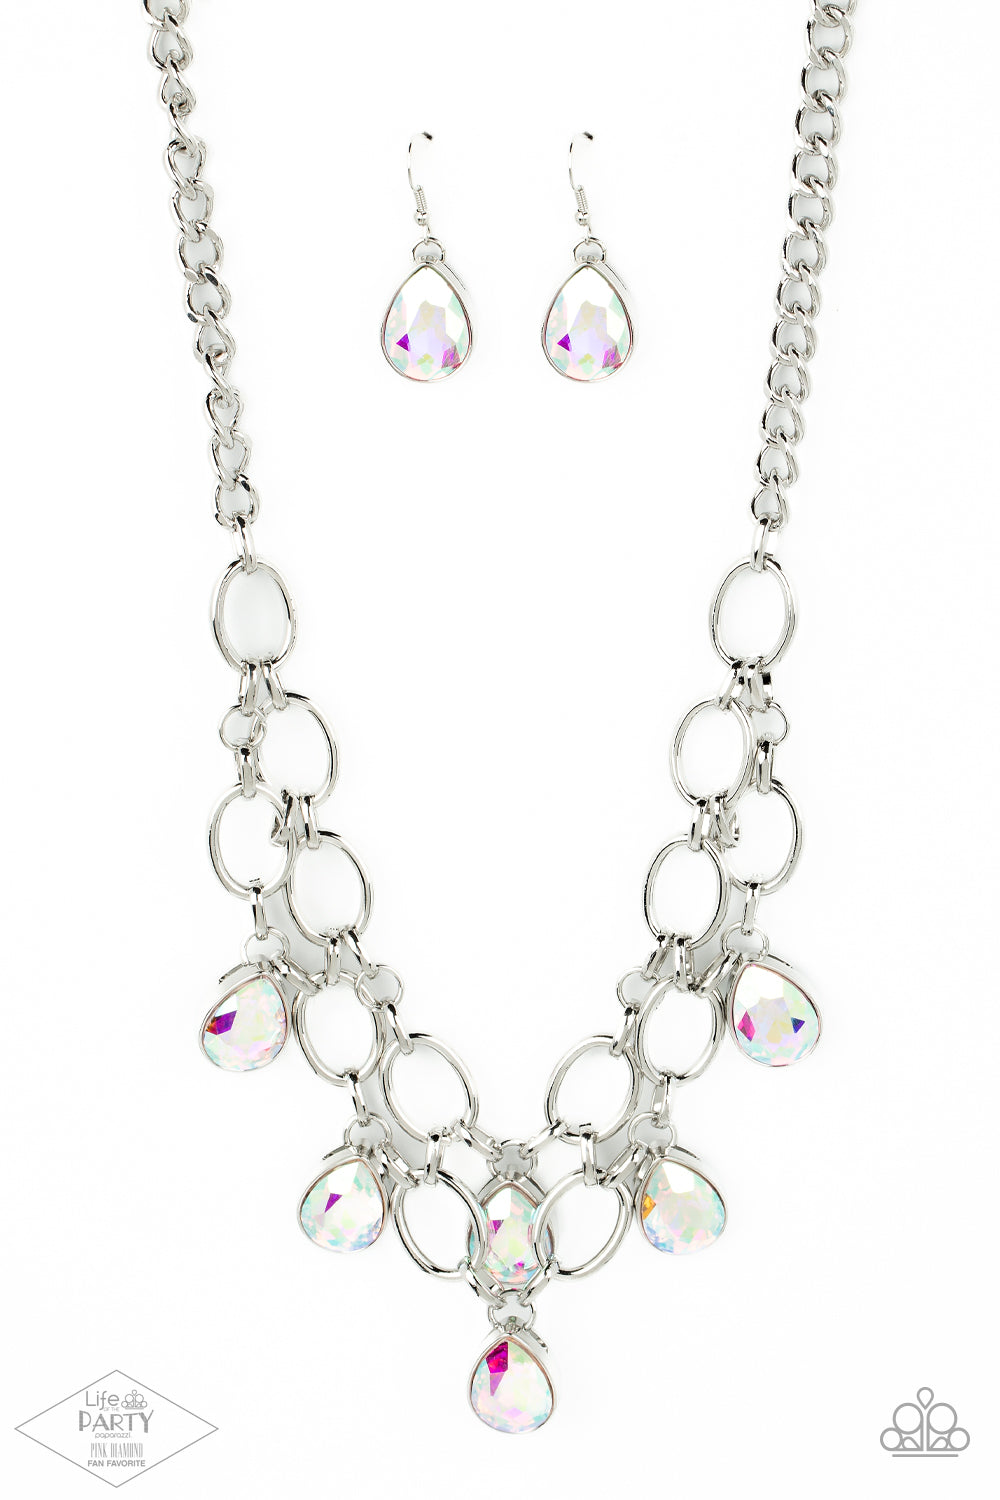 Joined by dainty silver links, two rows of dramatic silver chain layer below the collar in a fierce fashion. Iridescent teardrop gems drip from the glistening layers, adding a timeless shimmer to the show-stopping piece. Features an adjustable clasp closure.  Sold as one individual necklace. Includes one pair of matching earrings.   FANFAVORITE